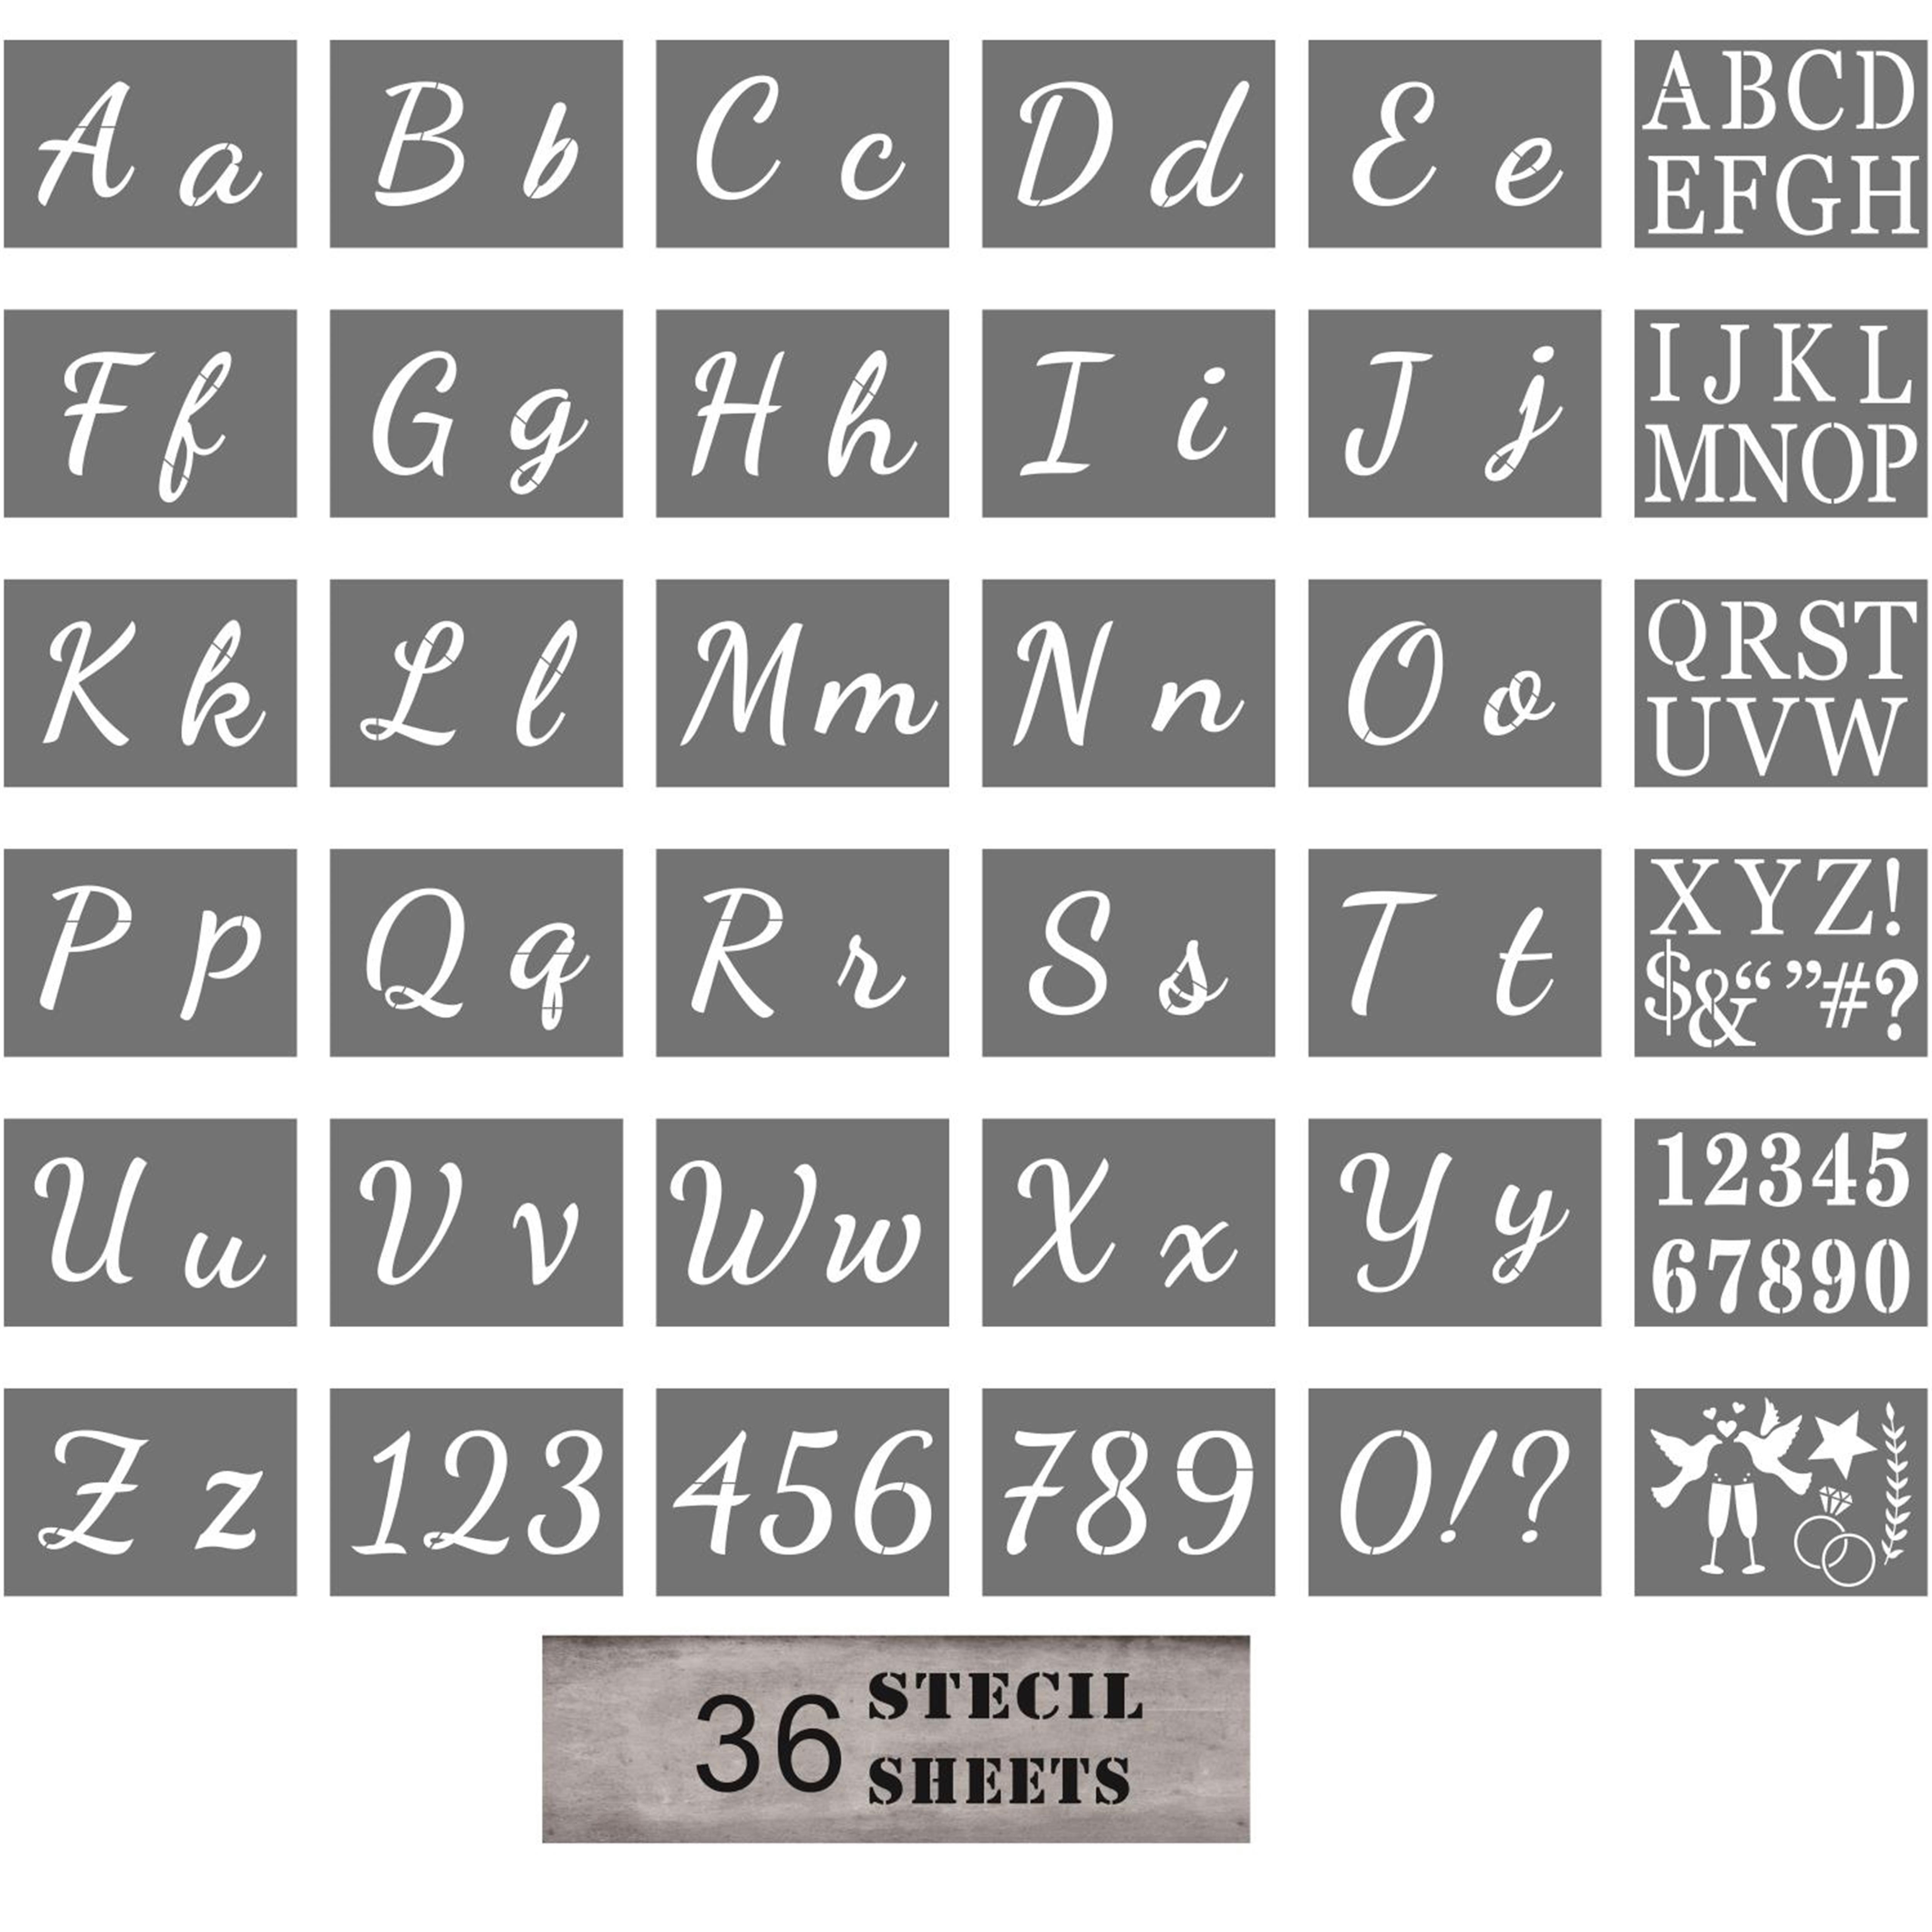 3 Inch Alphabet Letter Stencils for Painting - 70 Pack Letter and Number  Stencil Templates with Signs for Painting on Wood, Reusable Cursive Letters